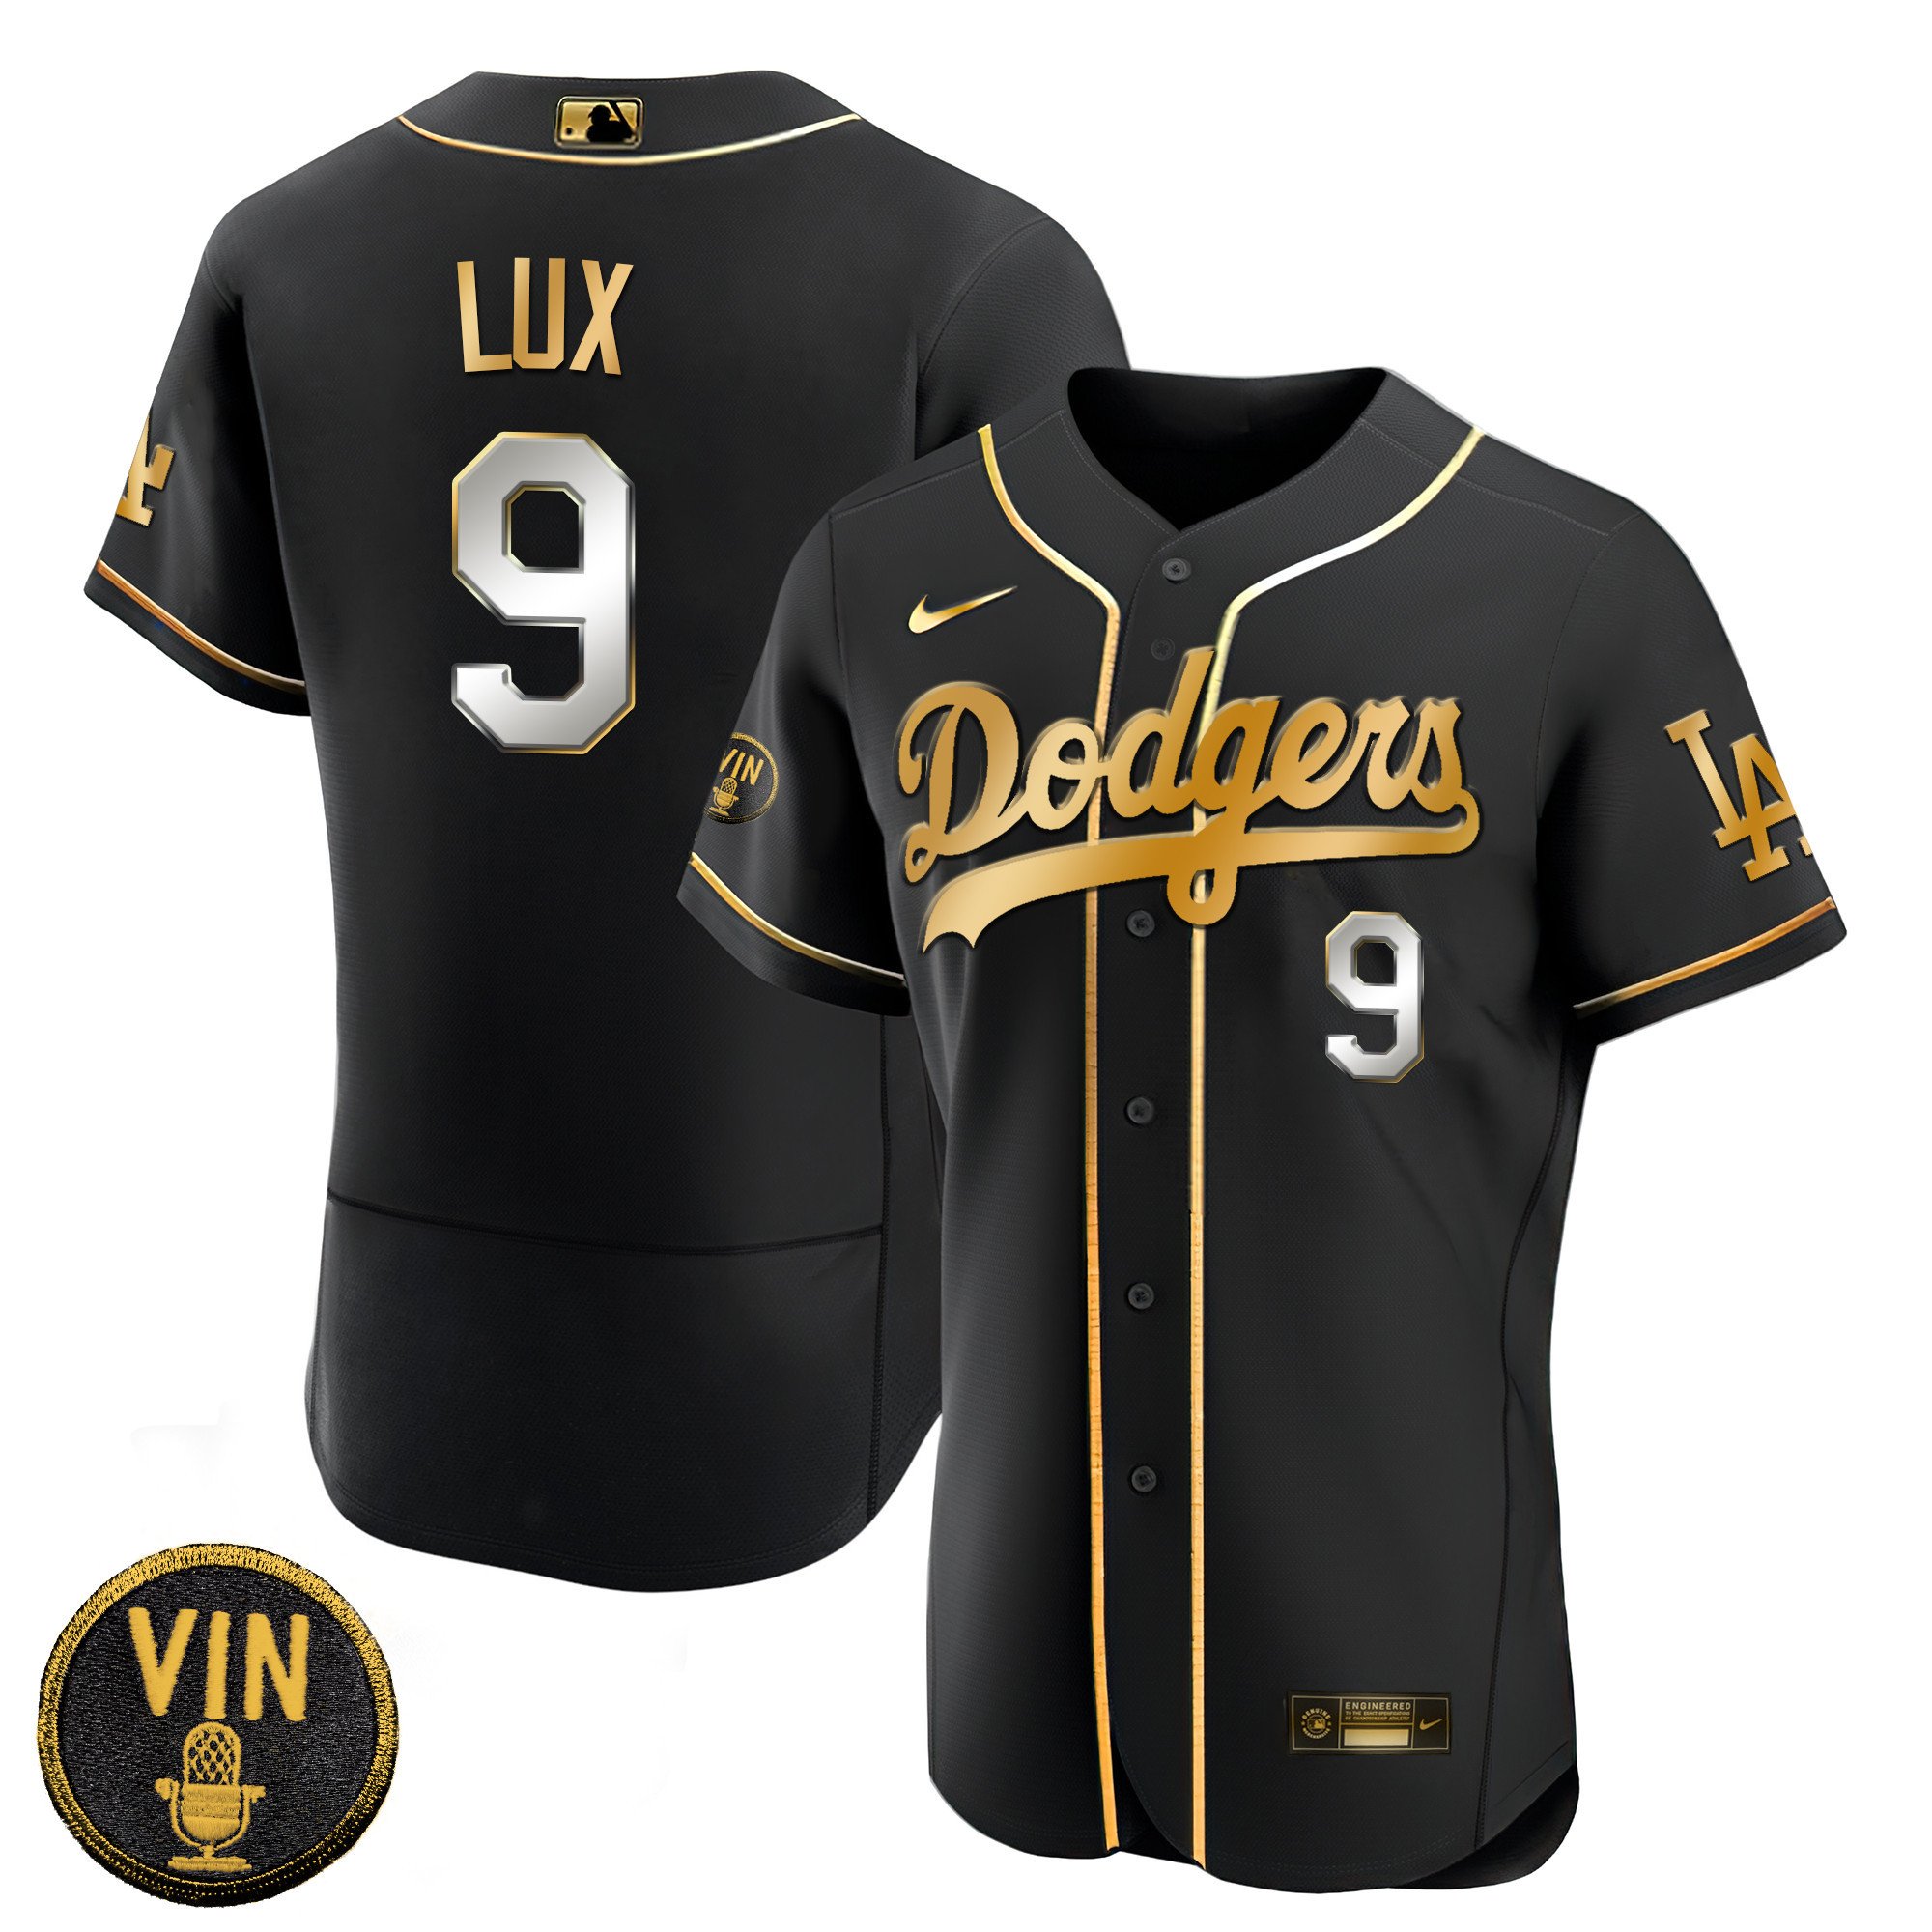 lux dodgers jersey